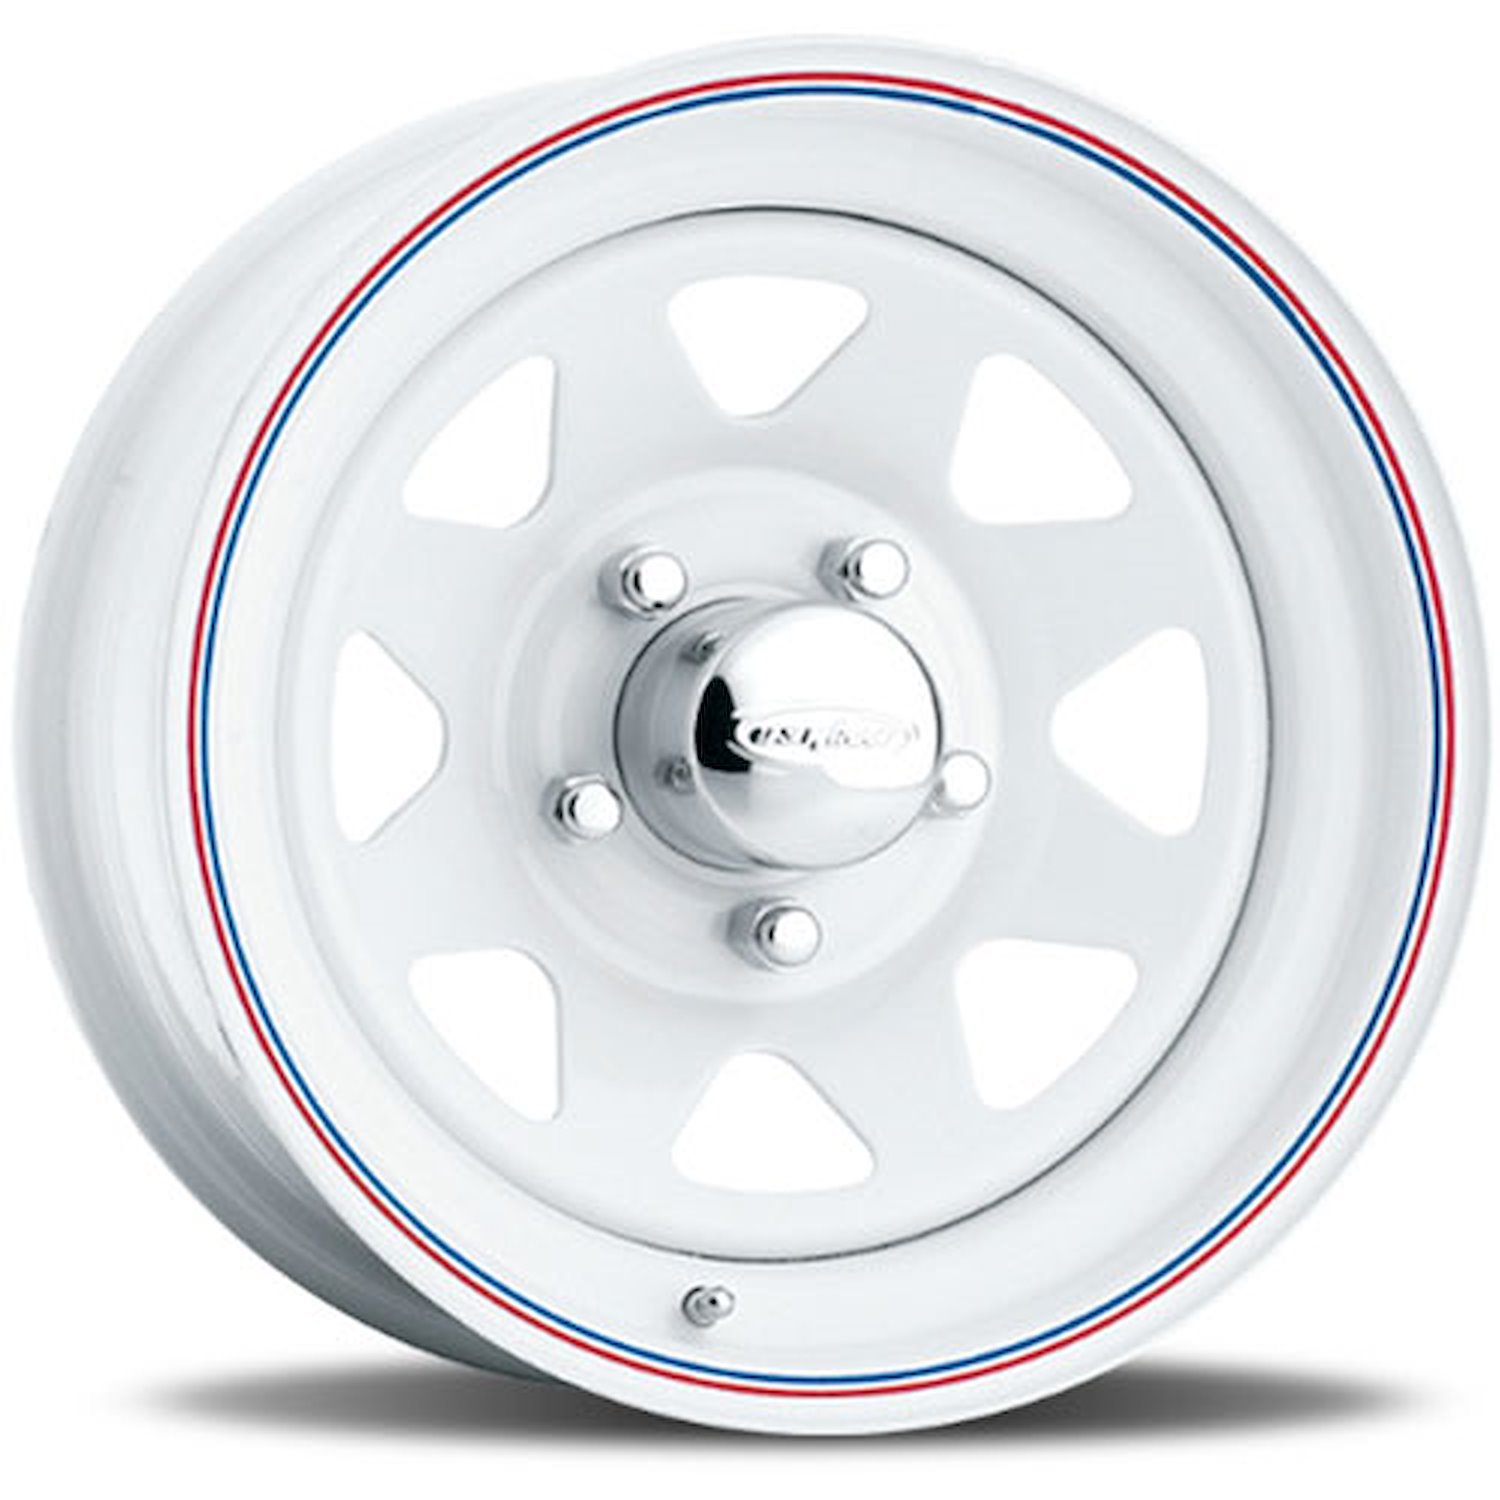 WHITE 8SPOKE 15 x 7 6 x 55 Bolt Circle 375 Back Spacing 6 offset 428 Center Bore 1600 lbs Load Rating